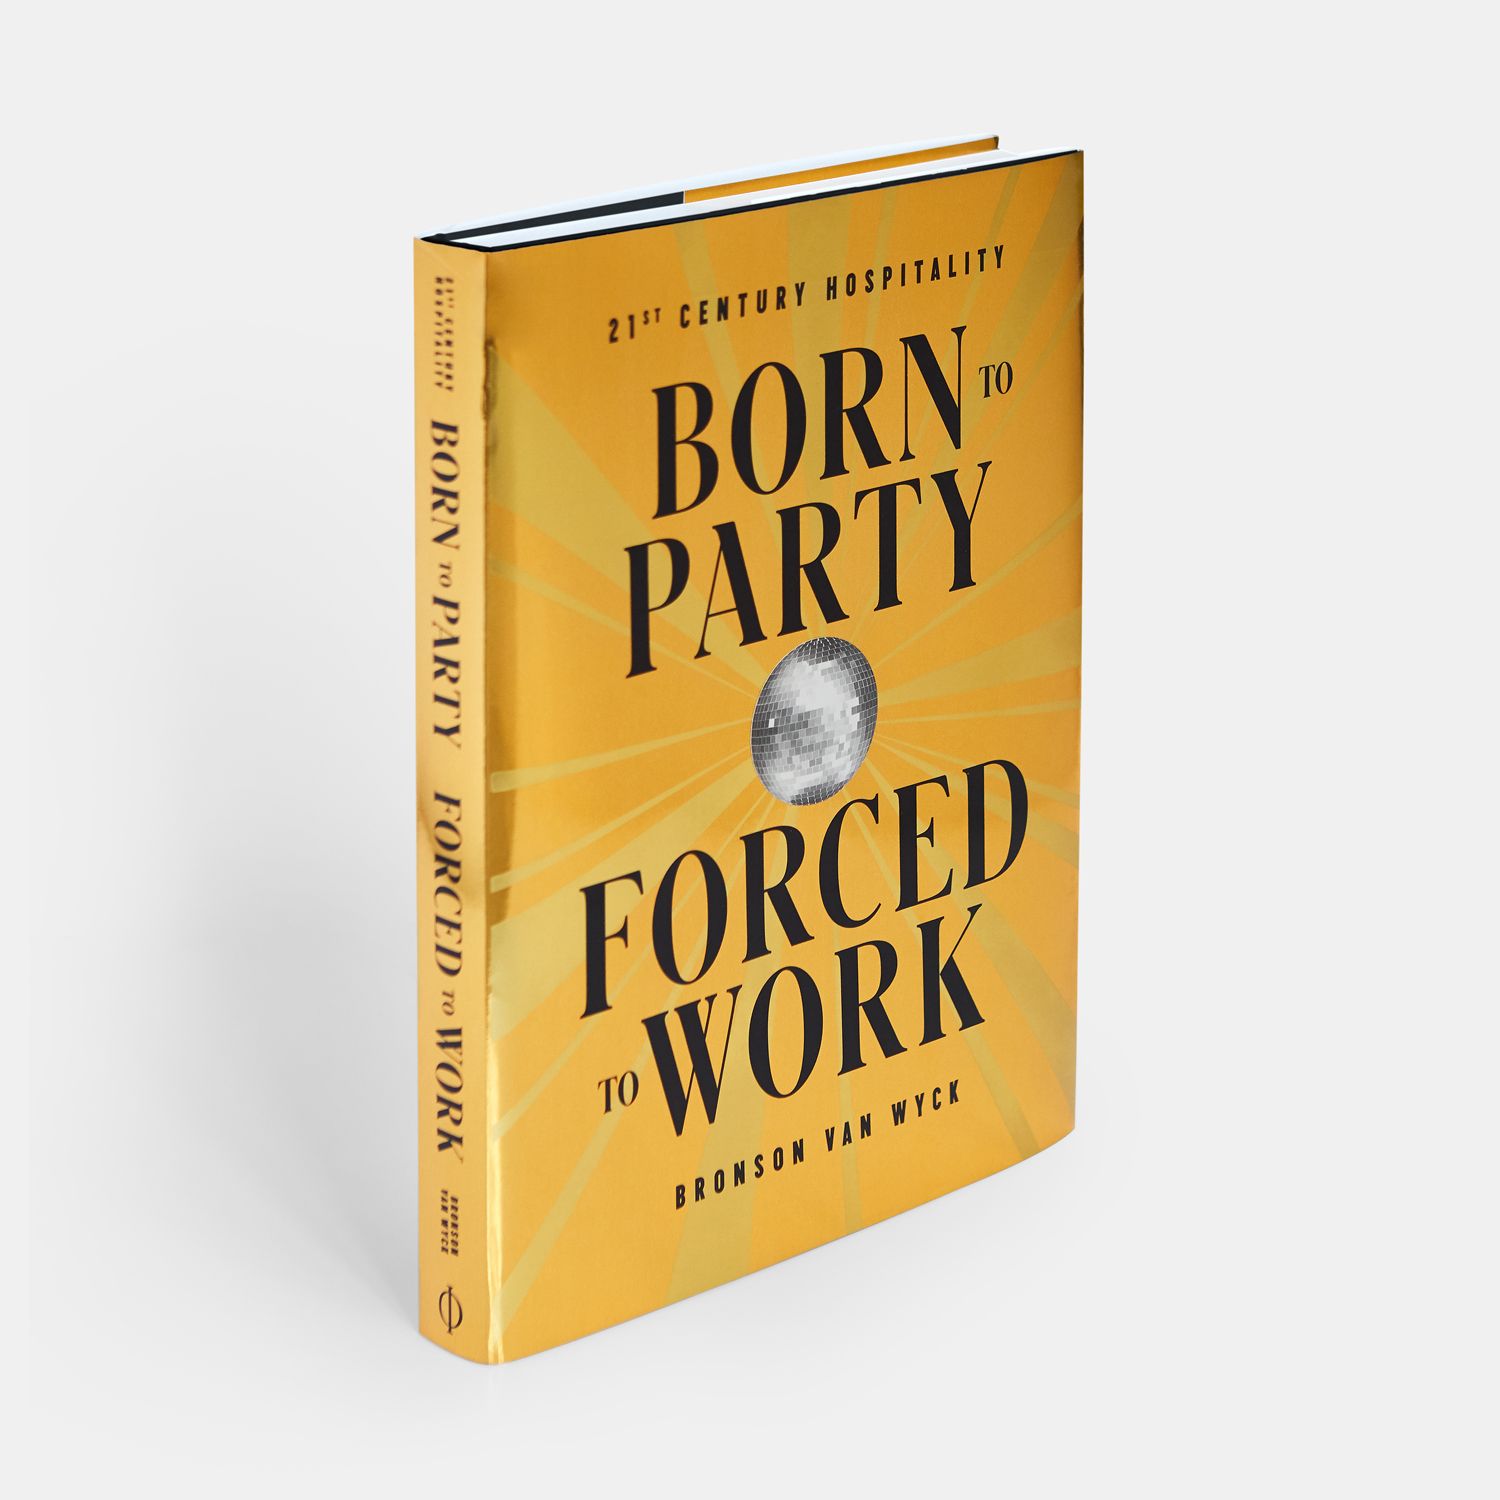 Born to Party, Forced to Work